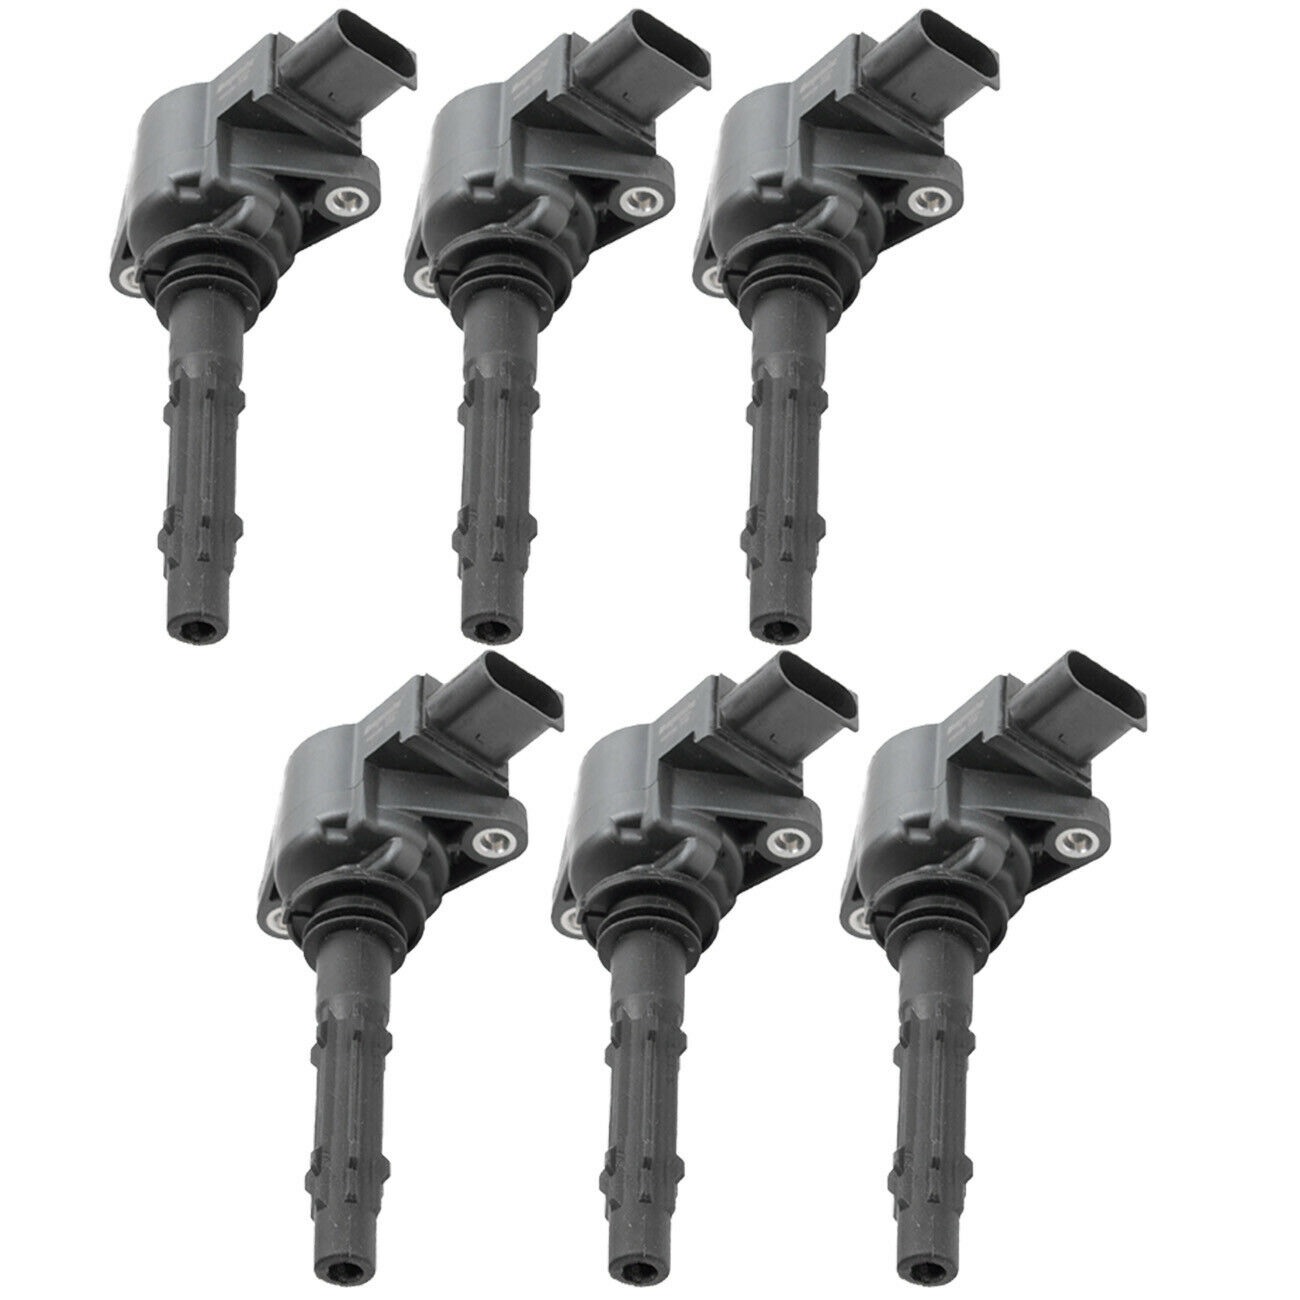 6Pcs Ignition Coils for Mercedes A209 W203 W211 W212 W221 R230 0001501980 German Made